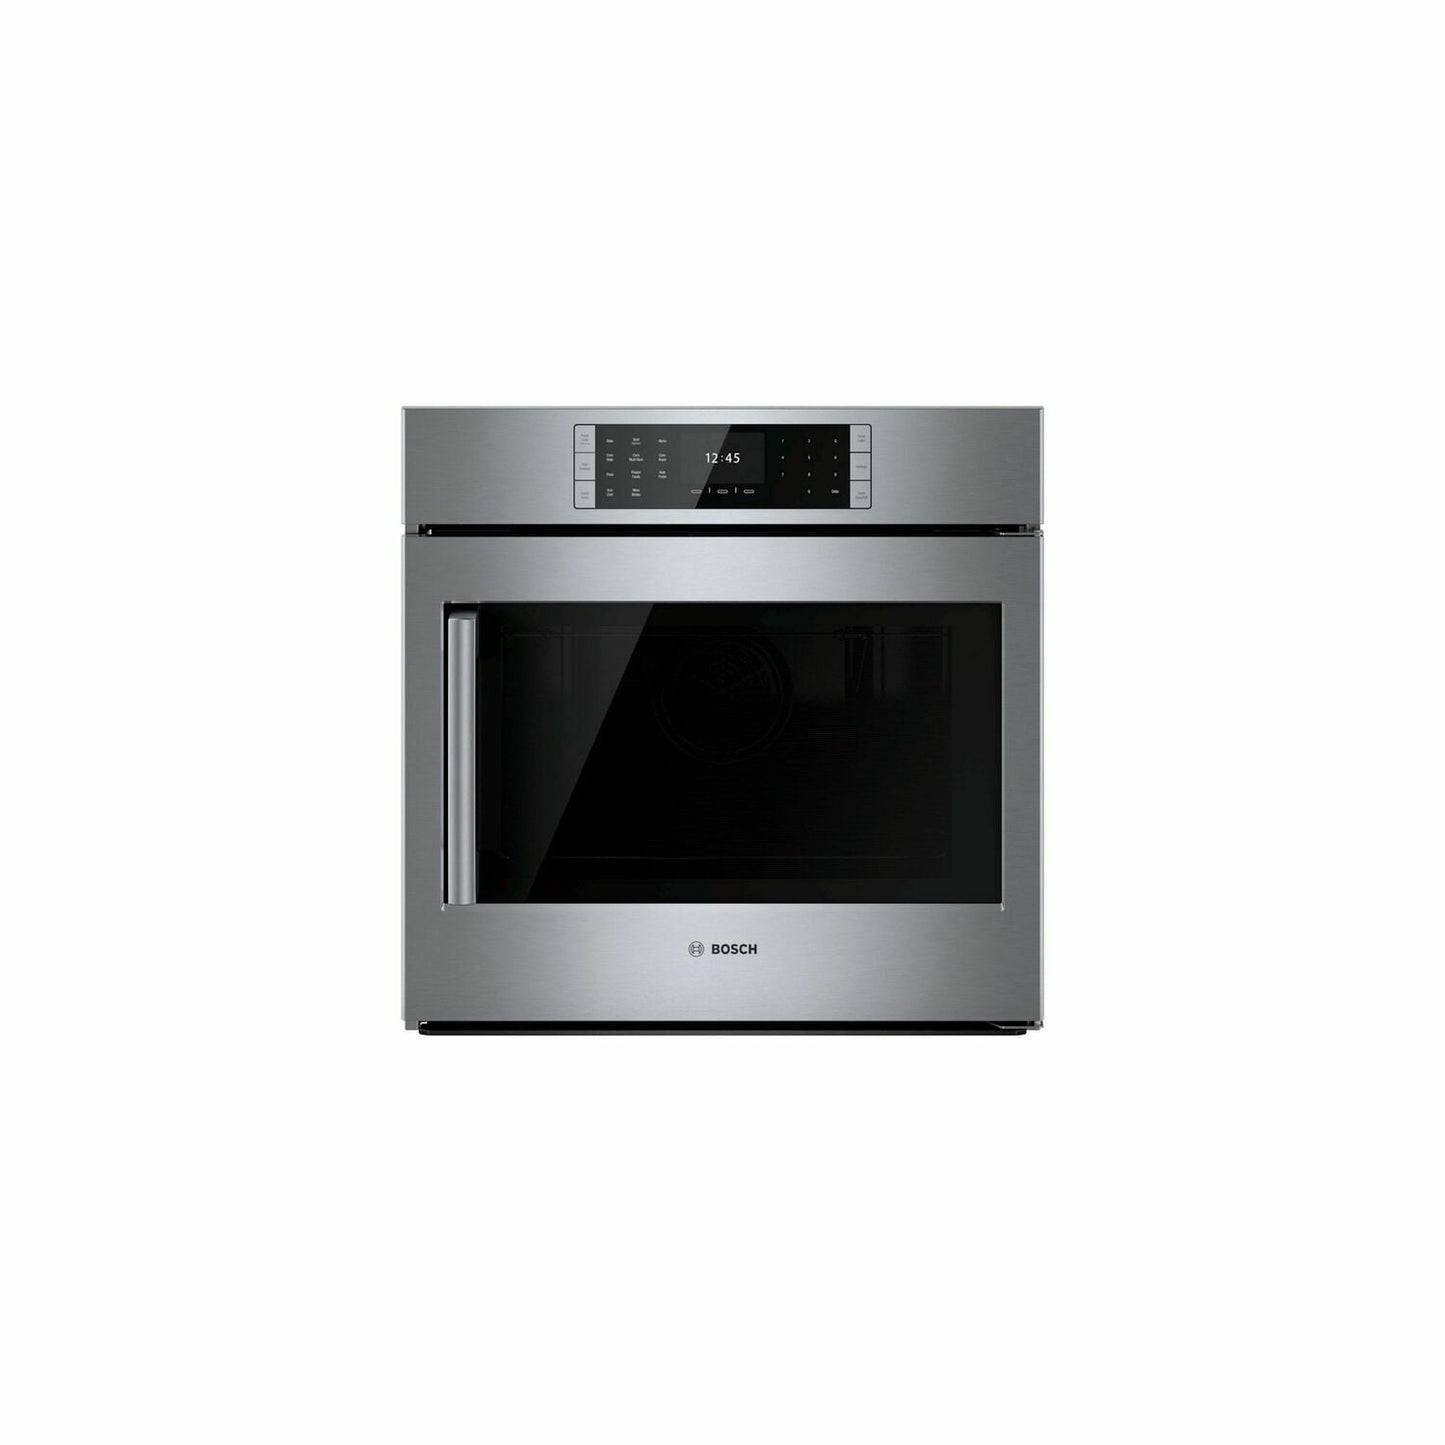 Bosch HBLP451RUC Benchmark Series, 30", Single Wall Oven, Ss, Eu Conv., Tft Touch Control, Right Swing